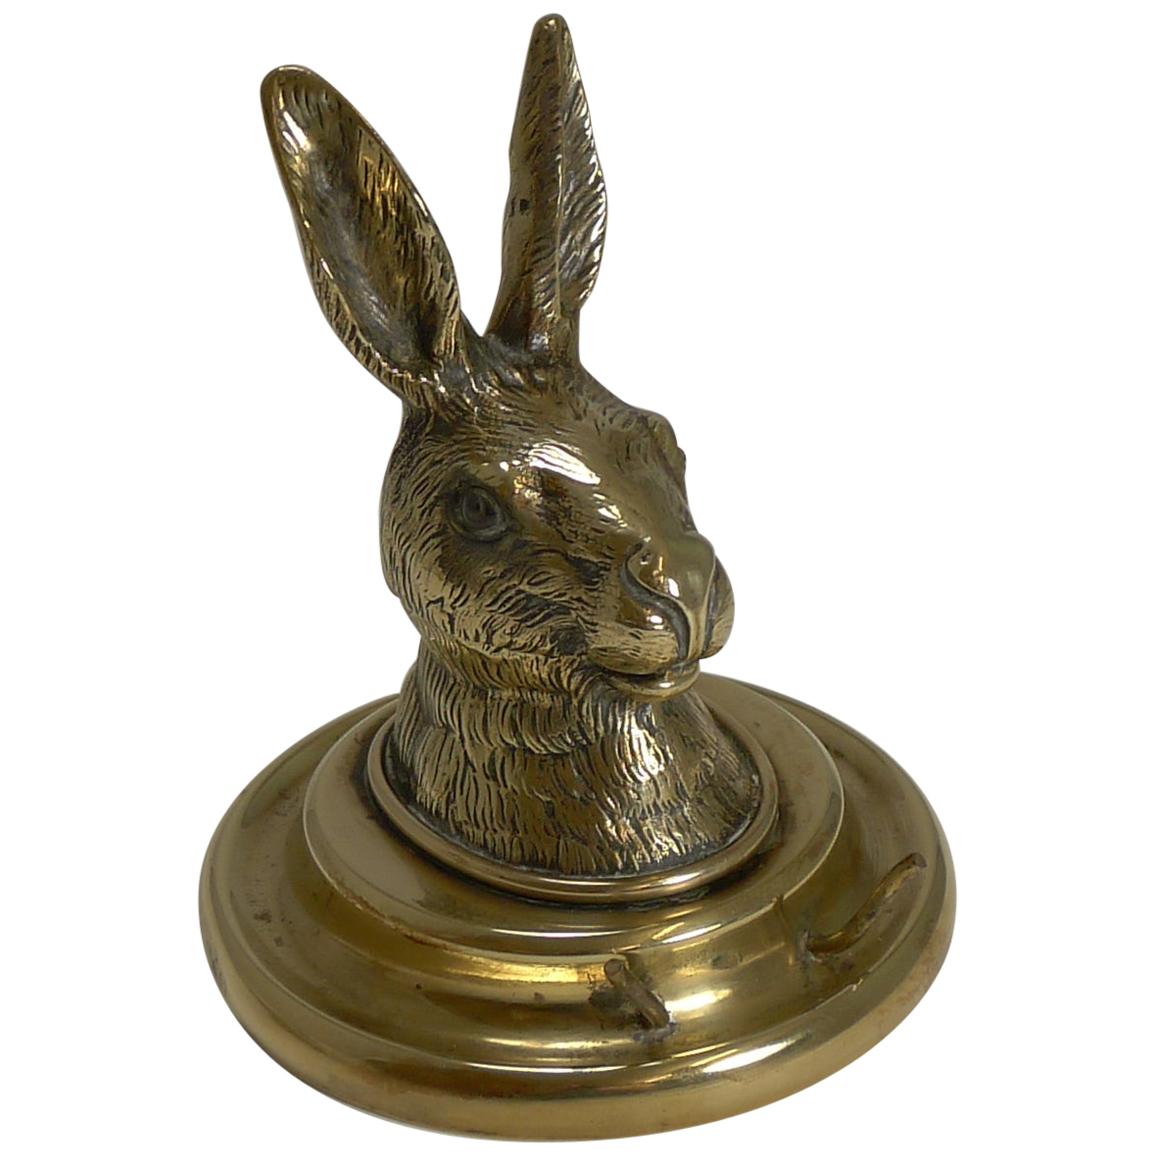 Antique English Novelty / Figural Brass Inkwell - Hare c.1880